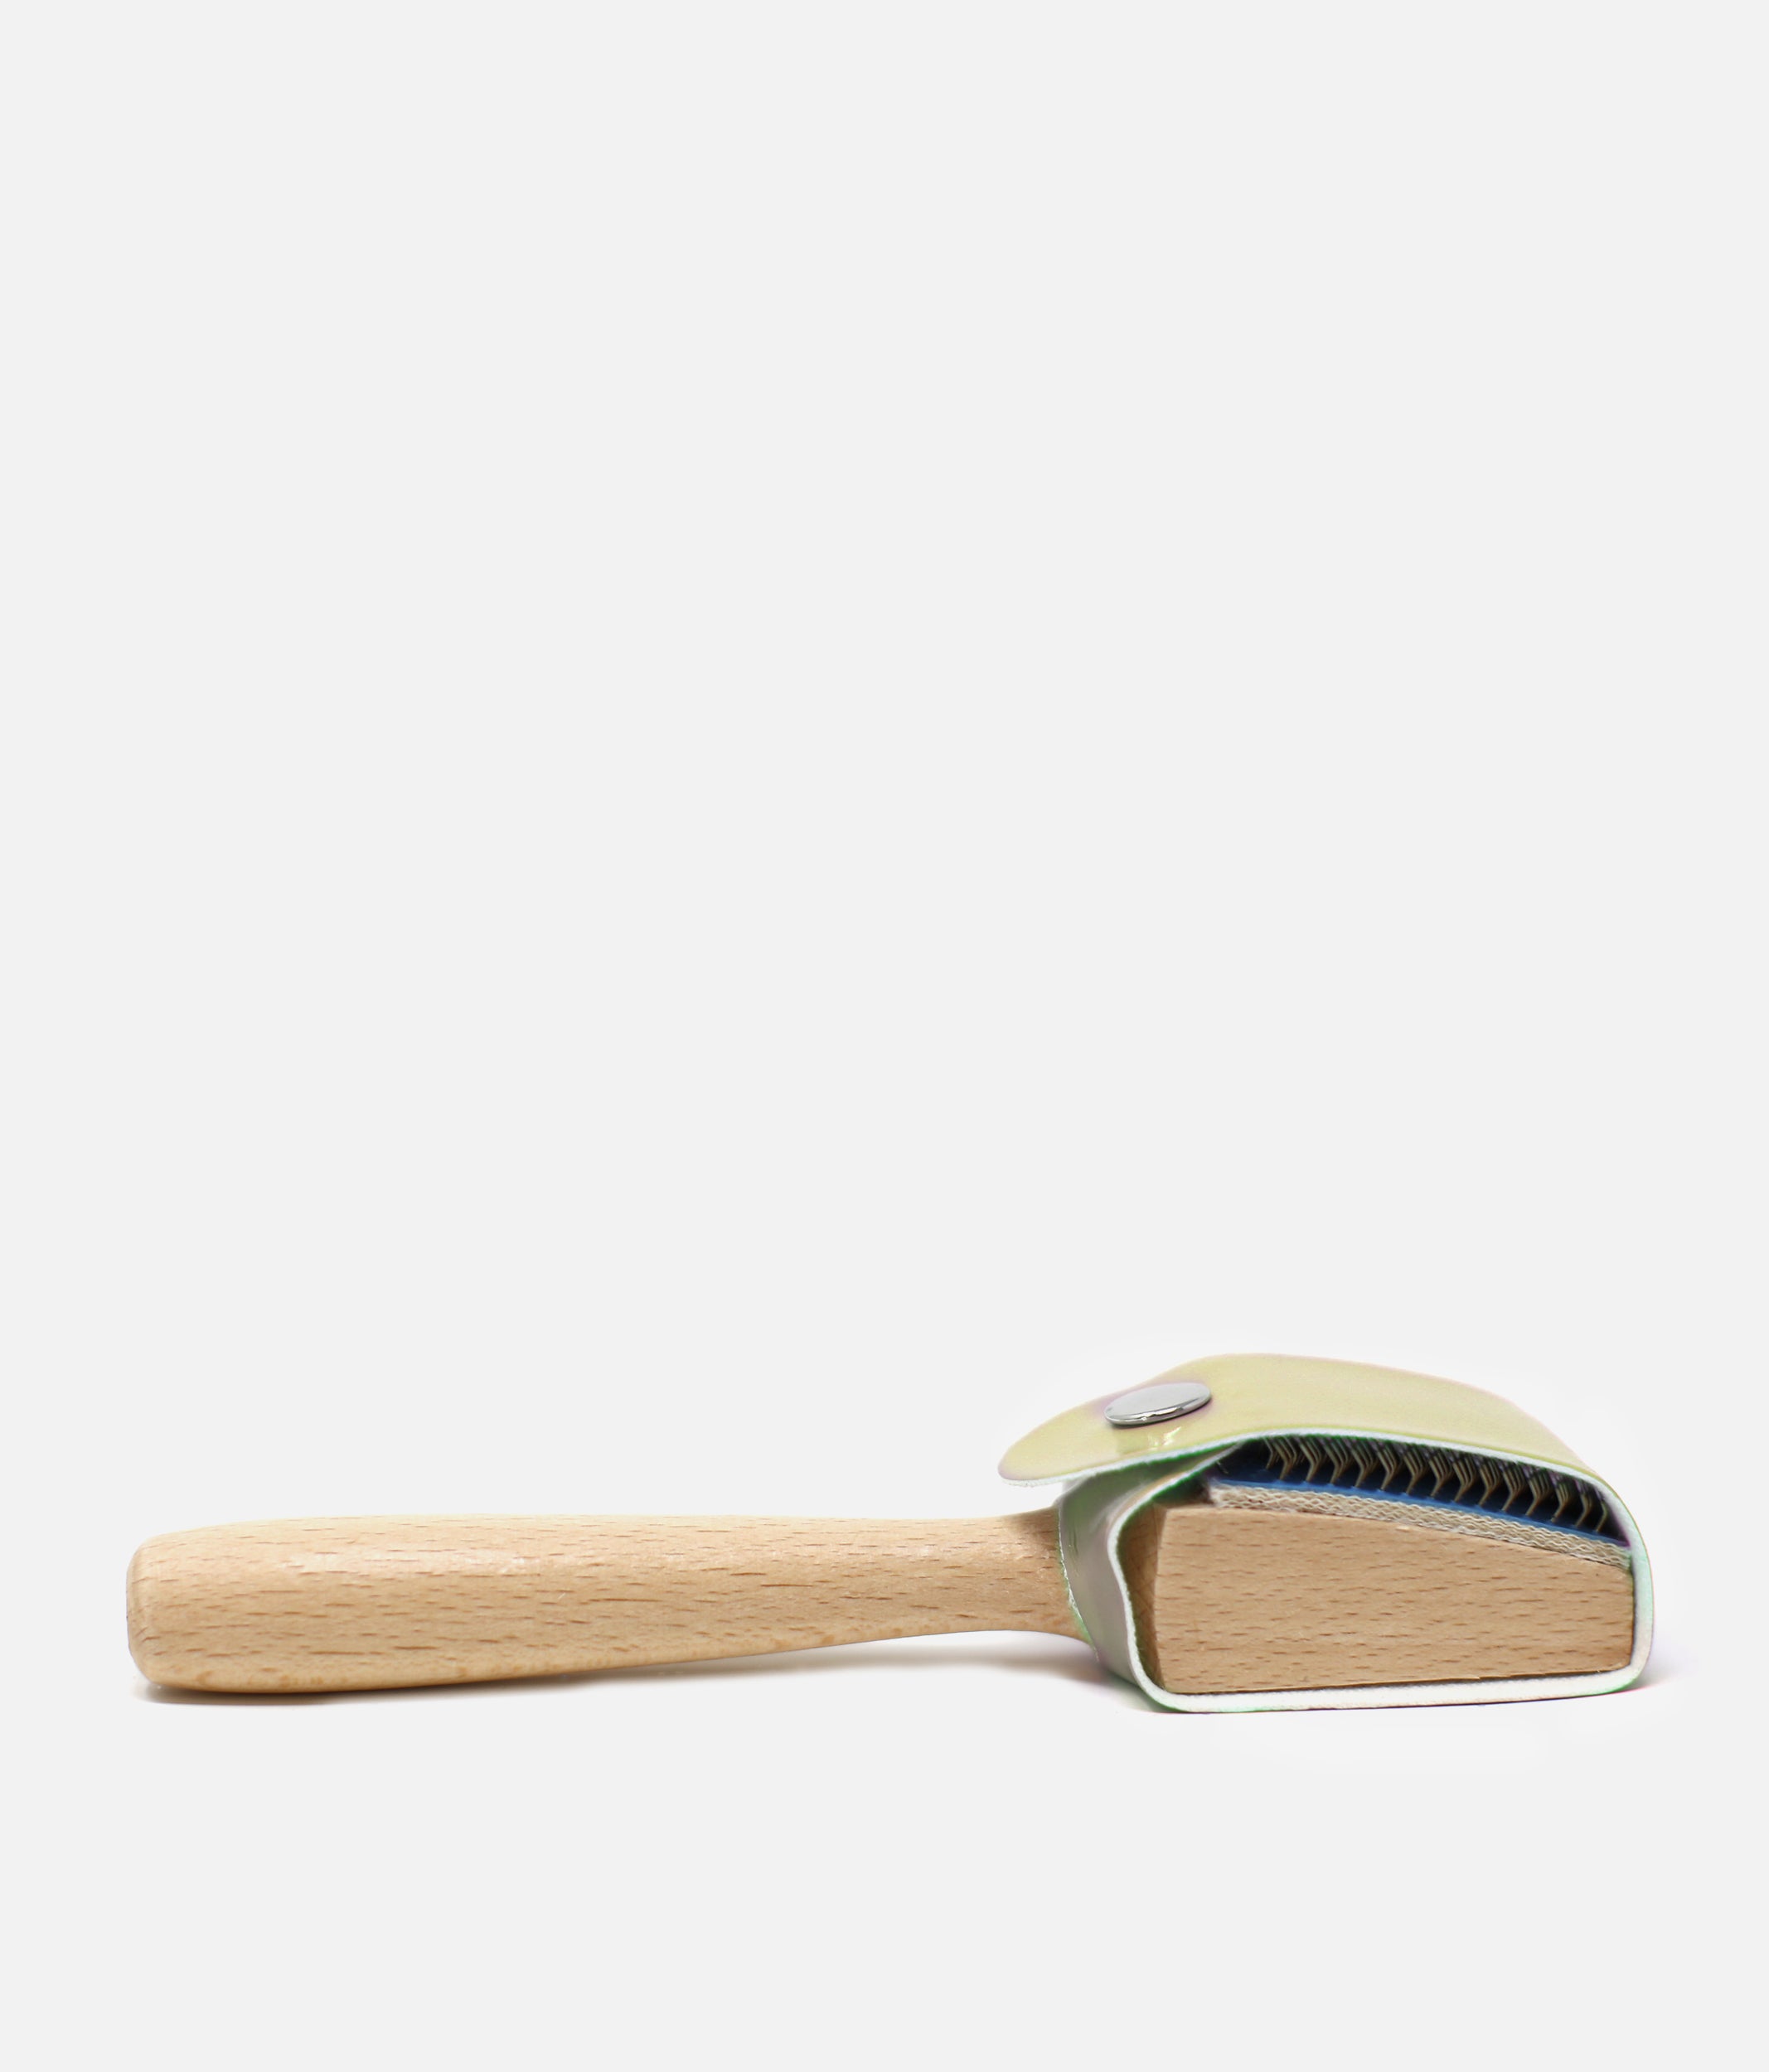 Suede Sole Shoe Brush - TH 019